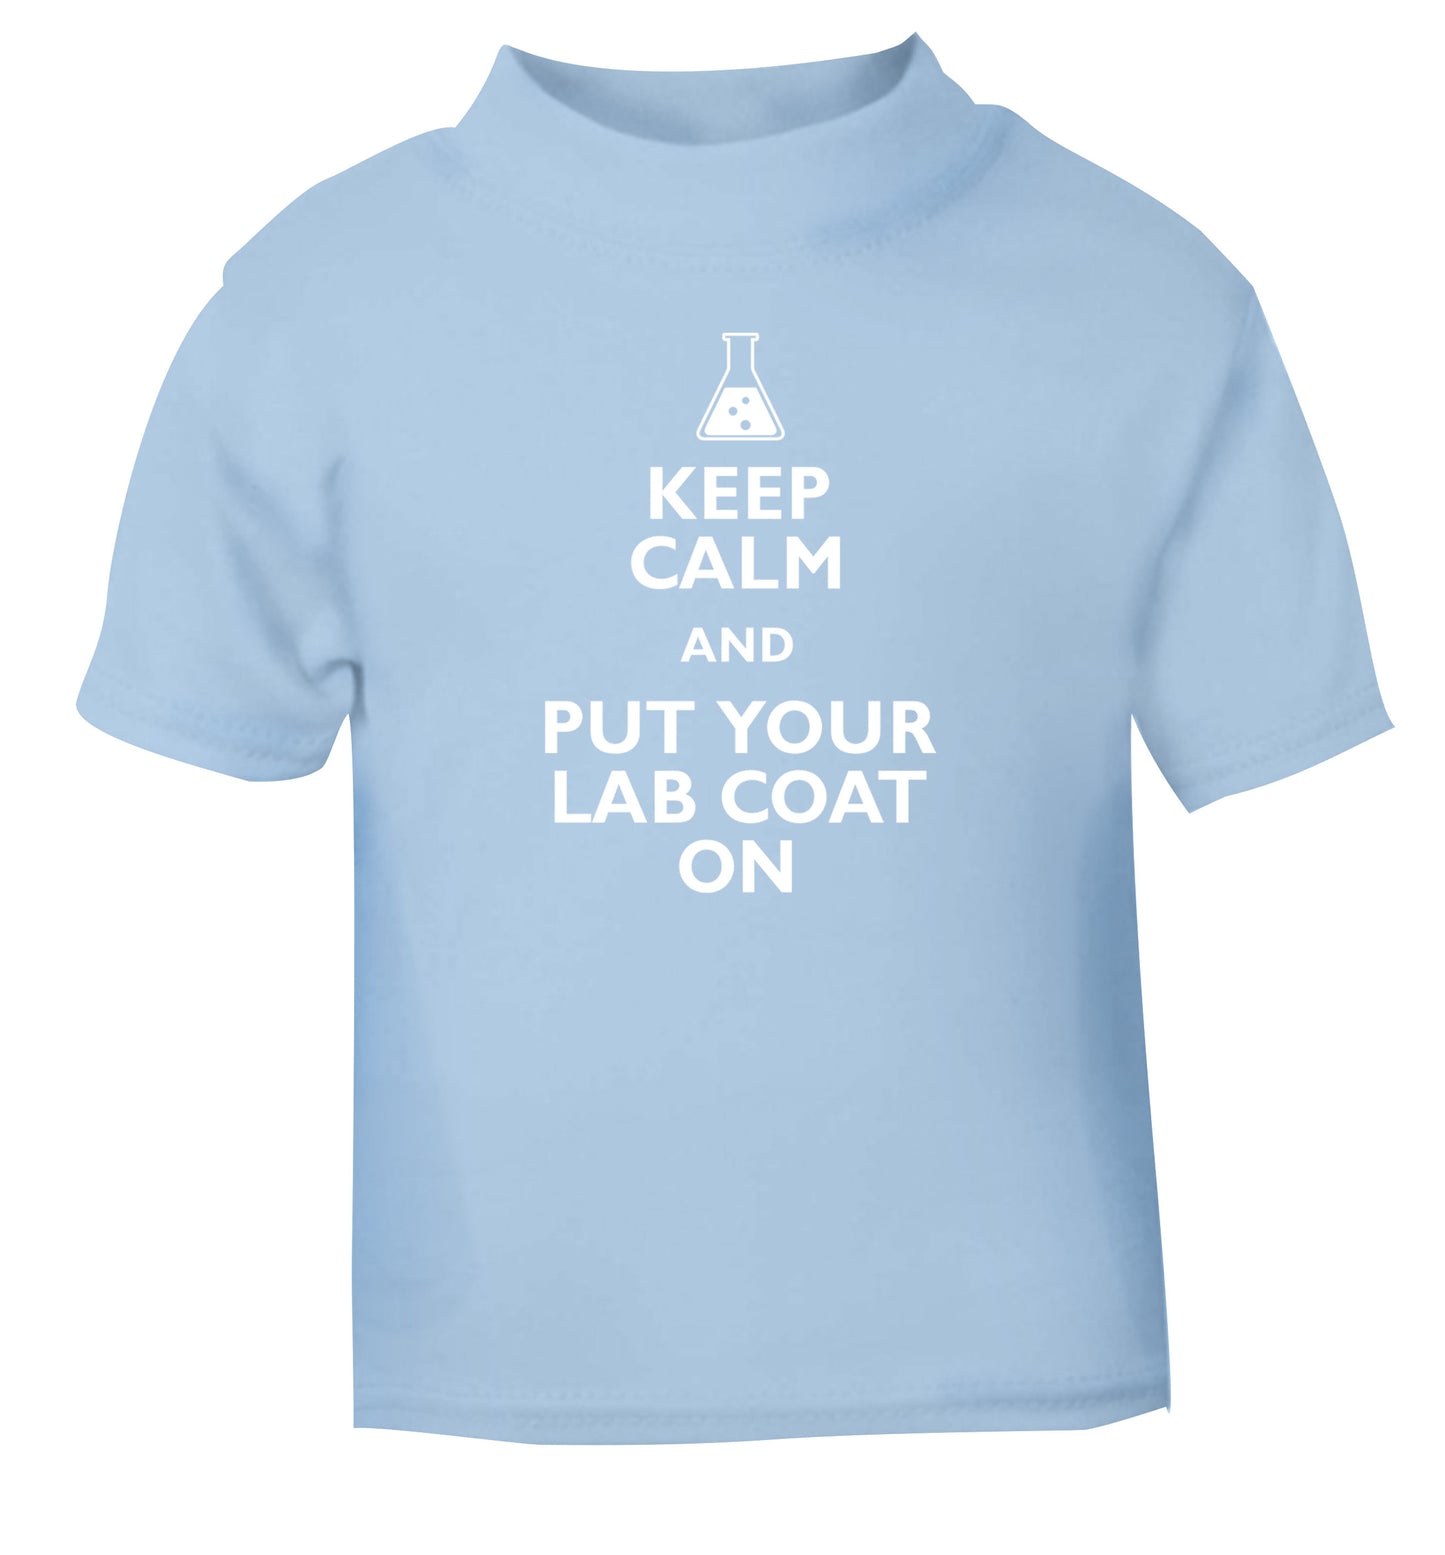 Keep calm and put your lab coat on light blue Baby Toddler Tshirt 2 Years